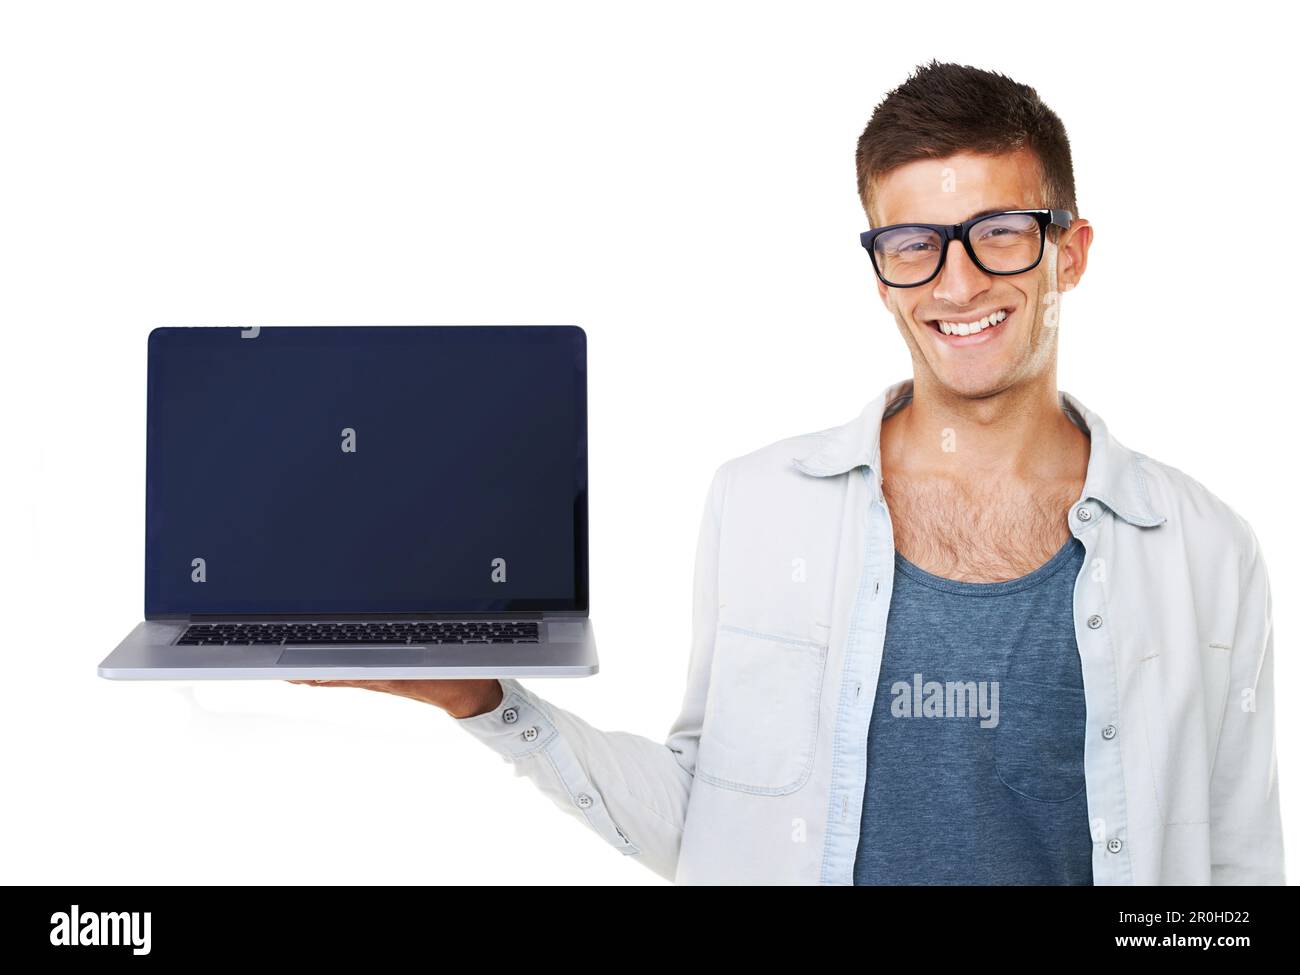 Introducing the latest laptop. A smiling casual male holding up a laptop. Stock Photo